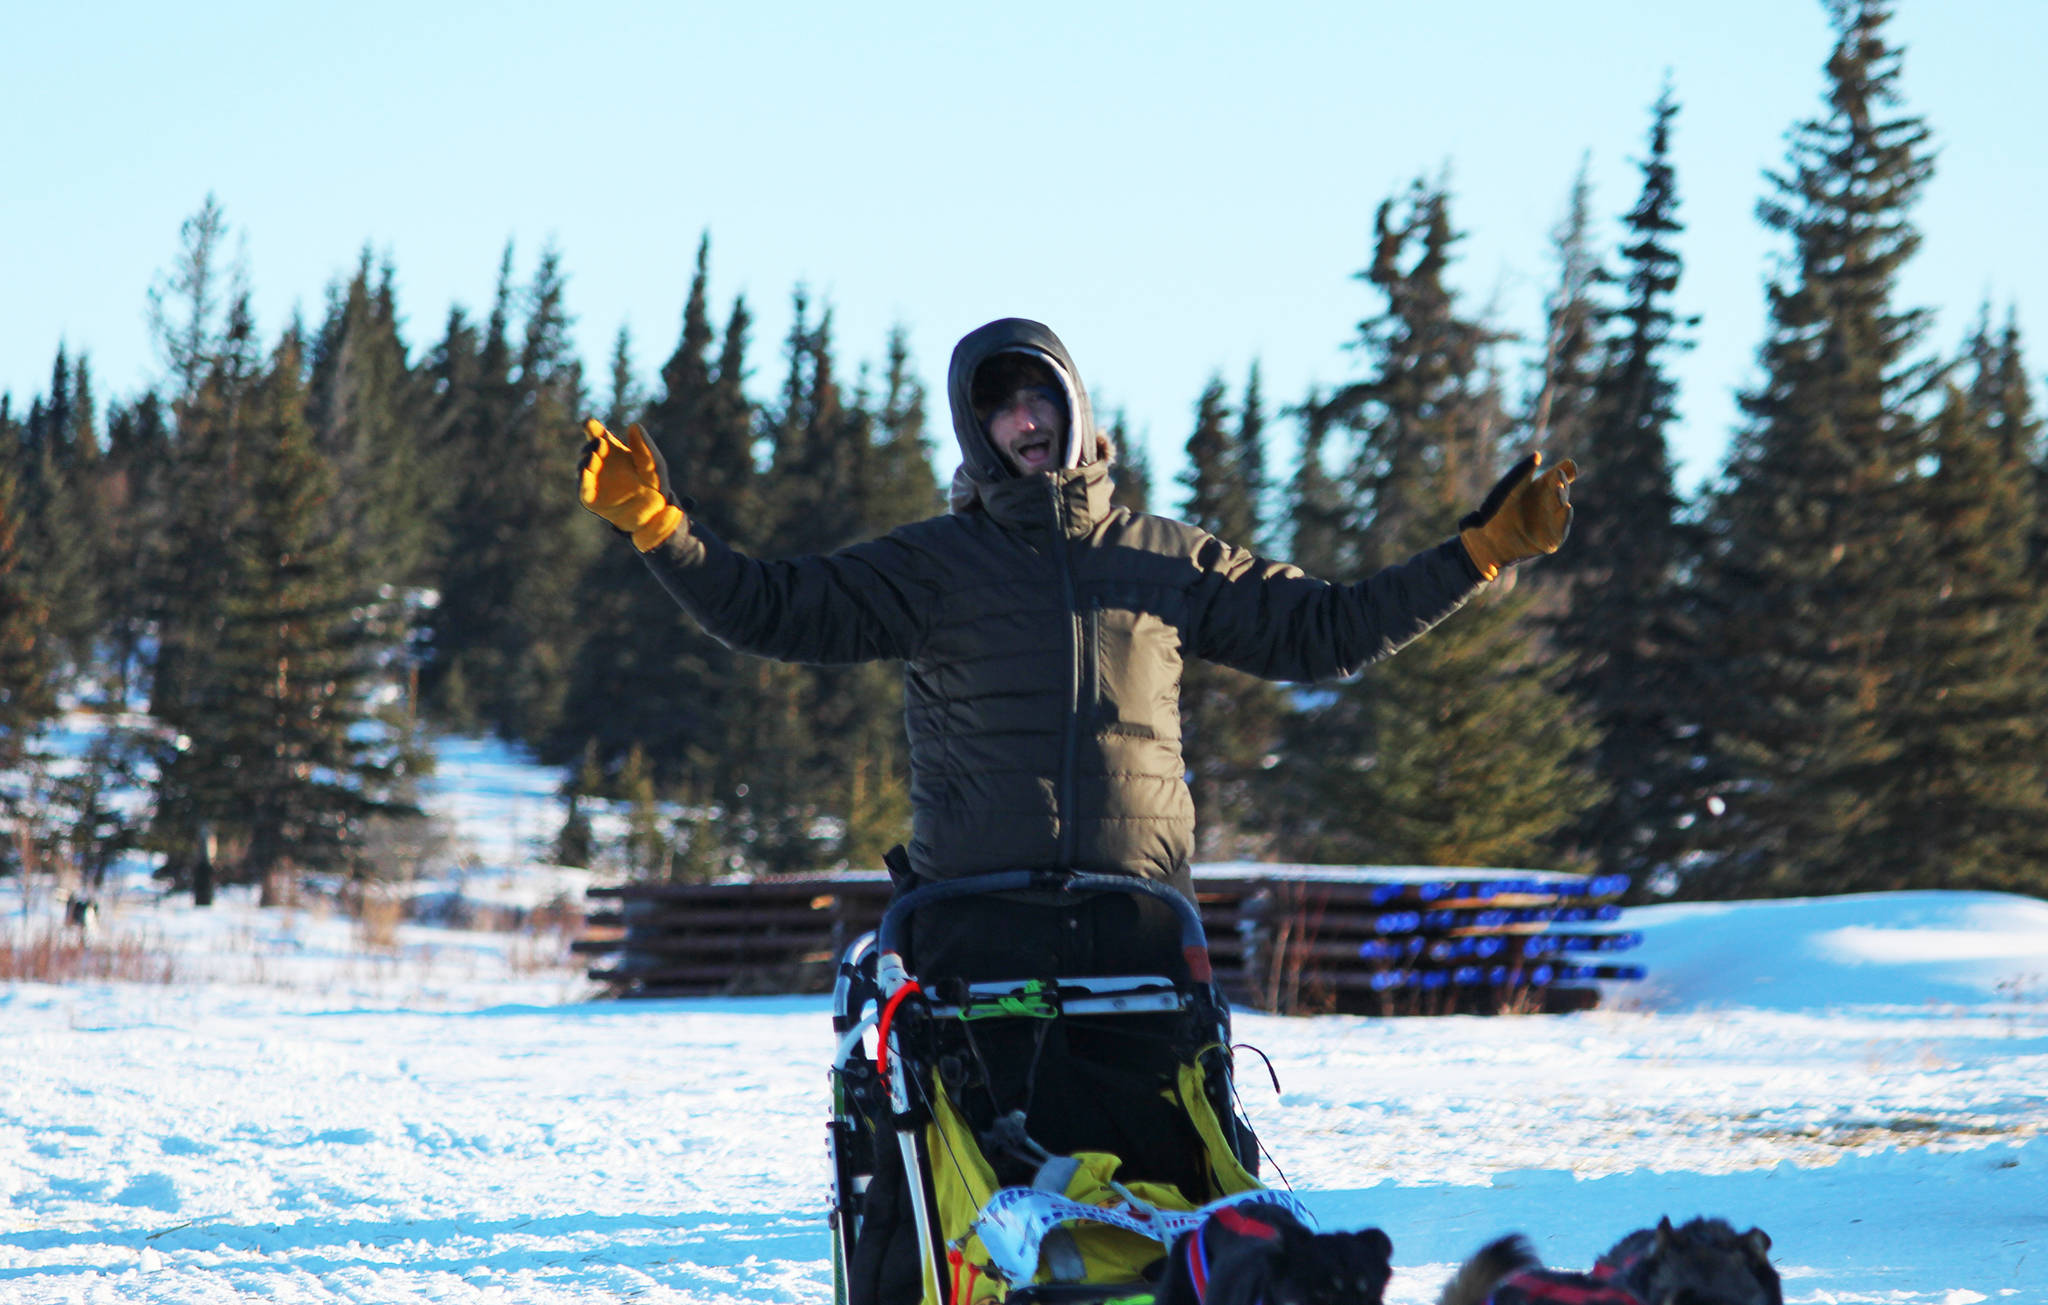 Musher Nicolas Petit raises his arms in celebration as he crosses the finish line of the Tustumena 200 Sled Dog Race in first place Sunday, Jan. 28, 2018 at Freddie’s Roadhouse in Ninilchik, Alaska. The win marked Petit’s third in a row this season, but was his first victory in the T200. (Photo by Megan Pacer/Homer News)